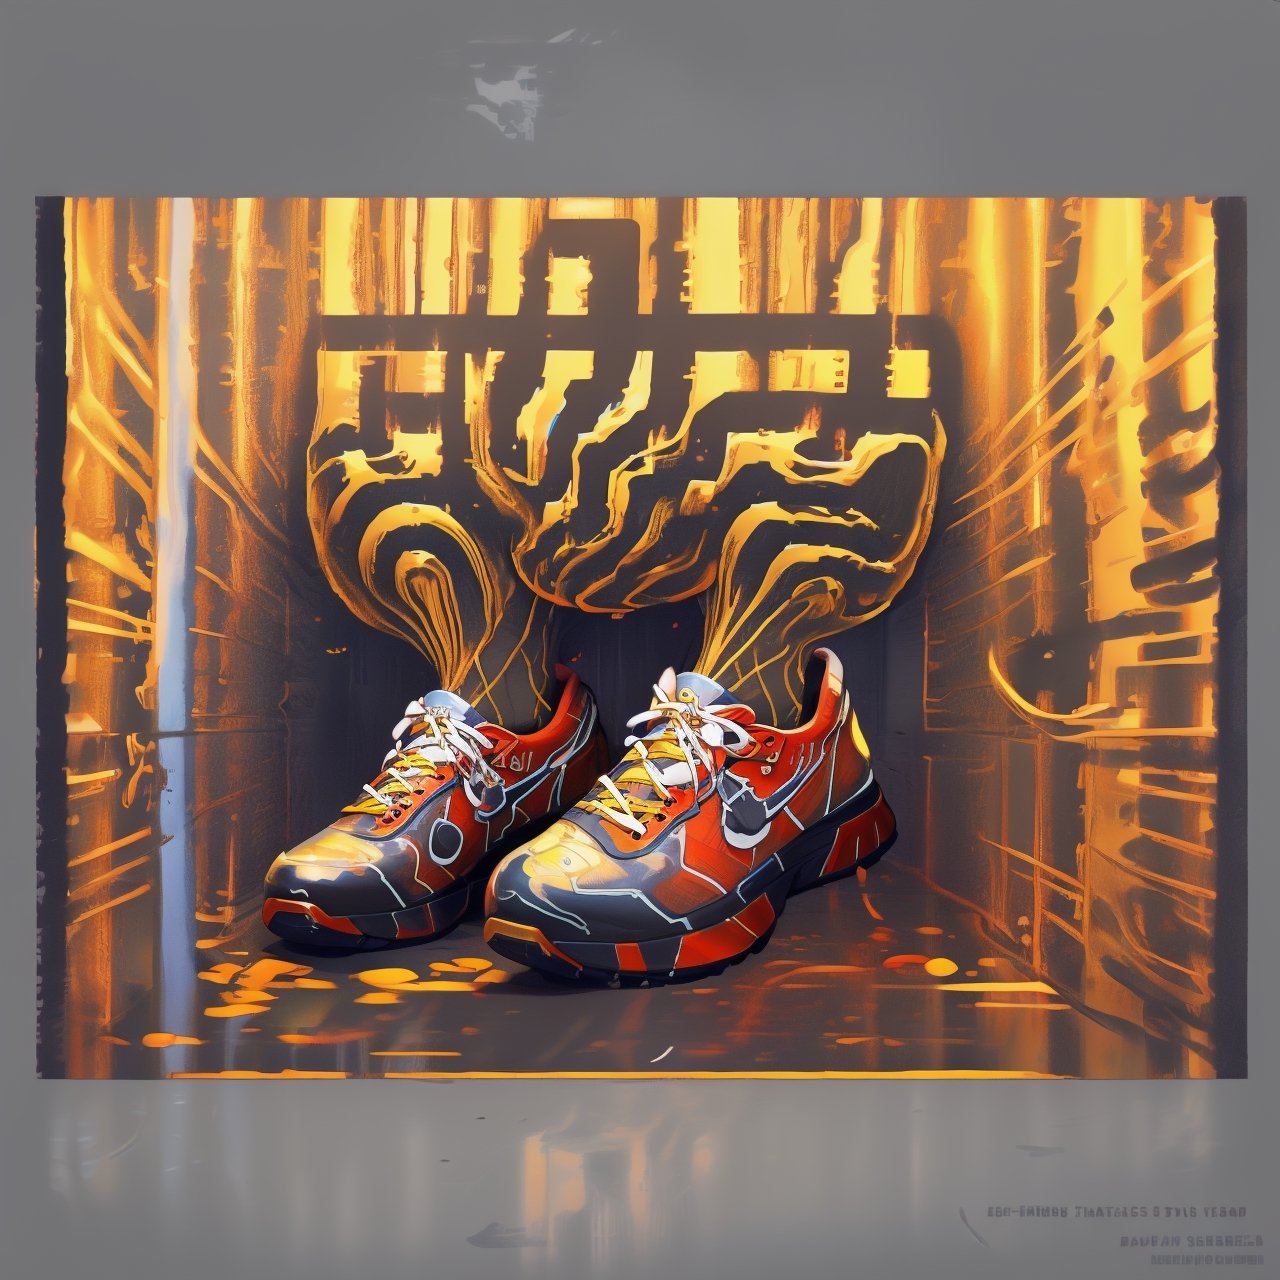 2d art , illustration drawing,  Basketball graffiti wall art style , shoe colored as golden state warriors color template, "stephen curry" tag , print design
